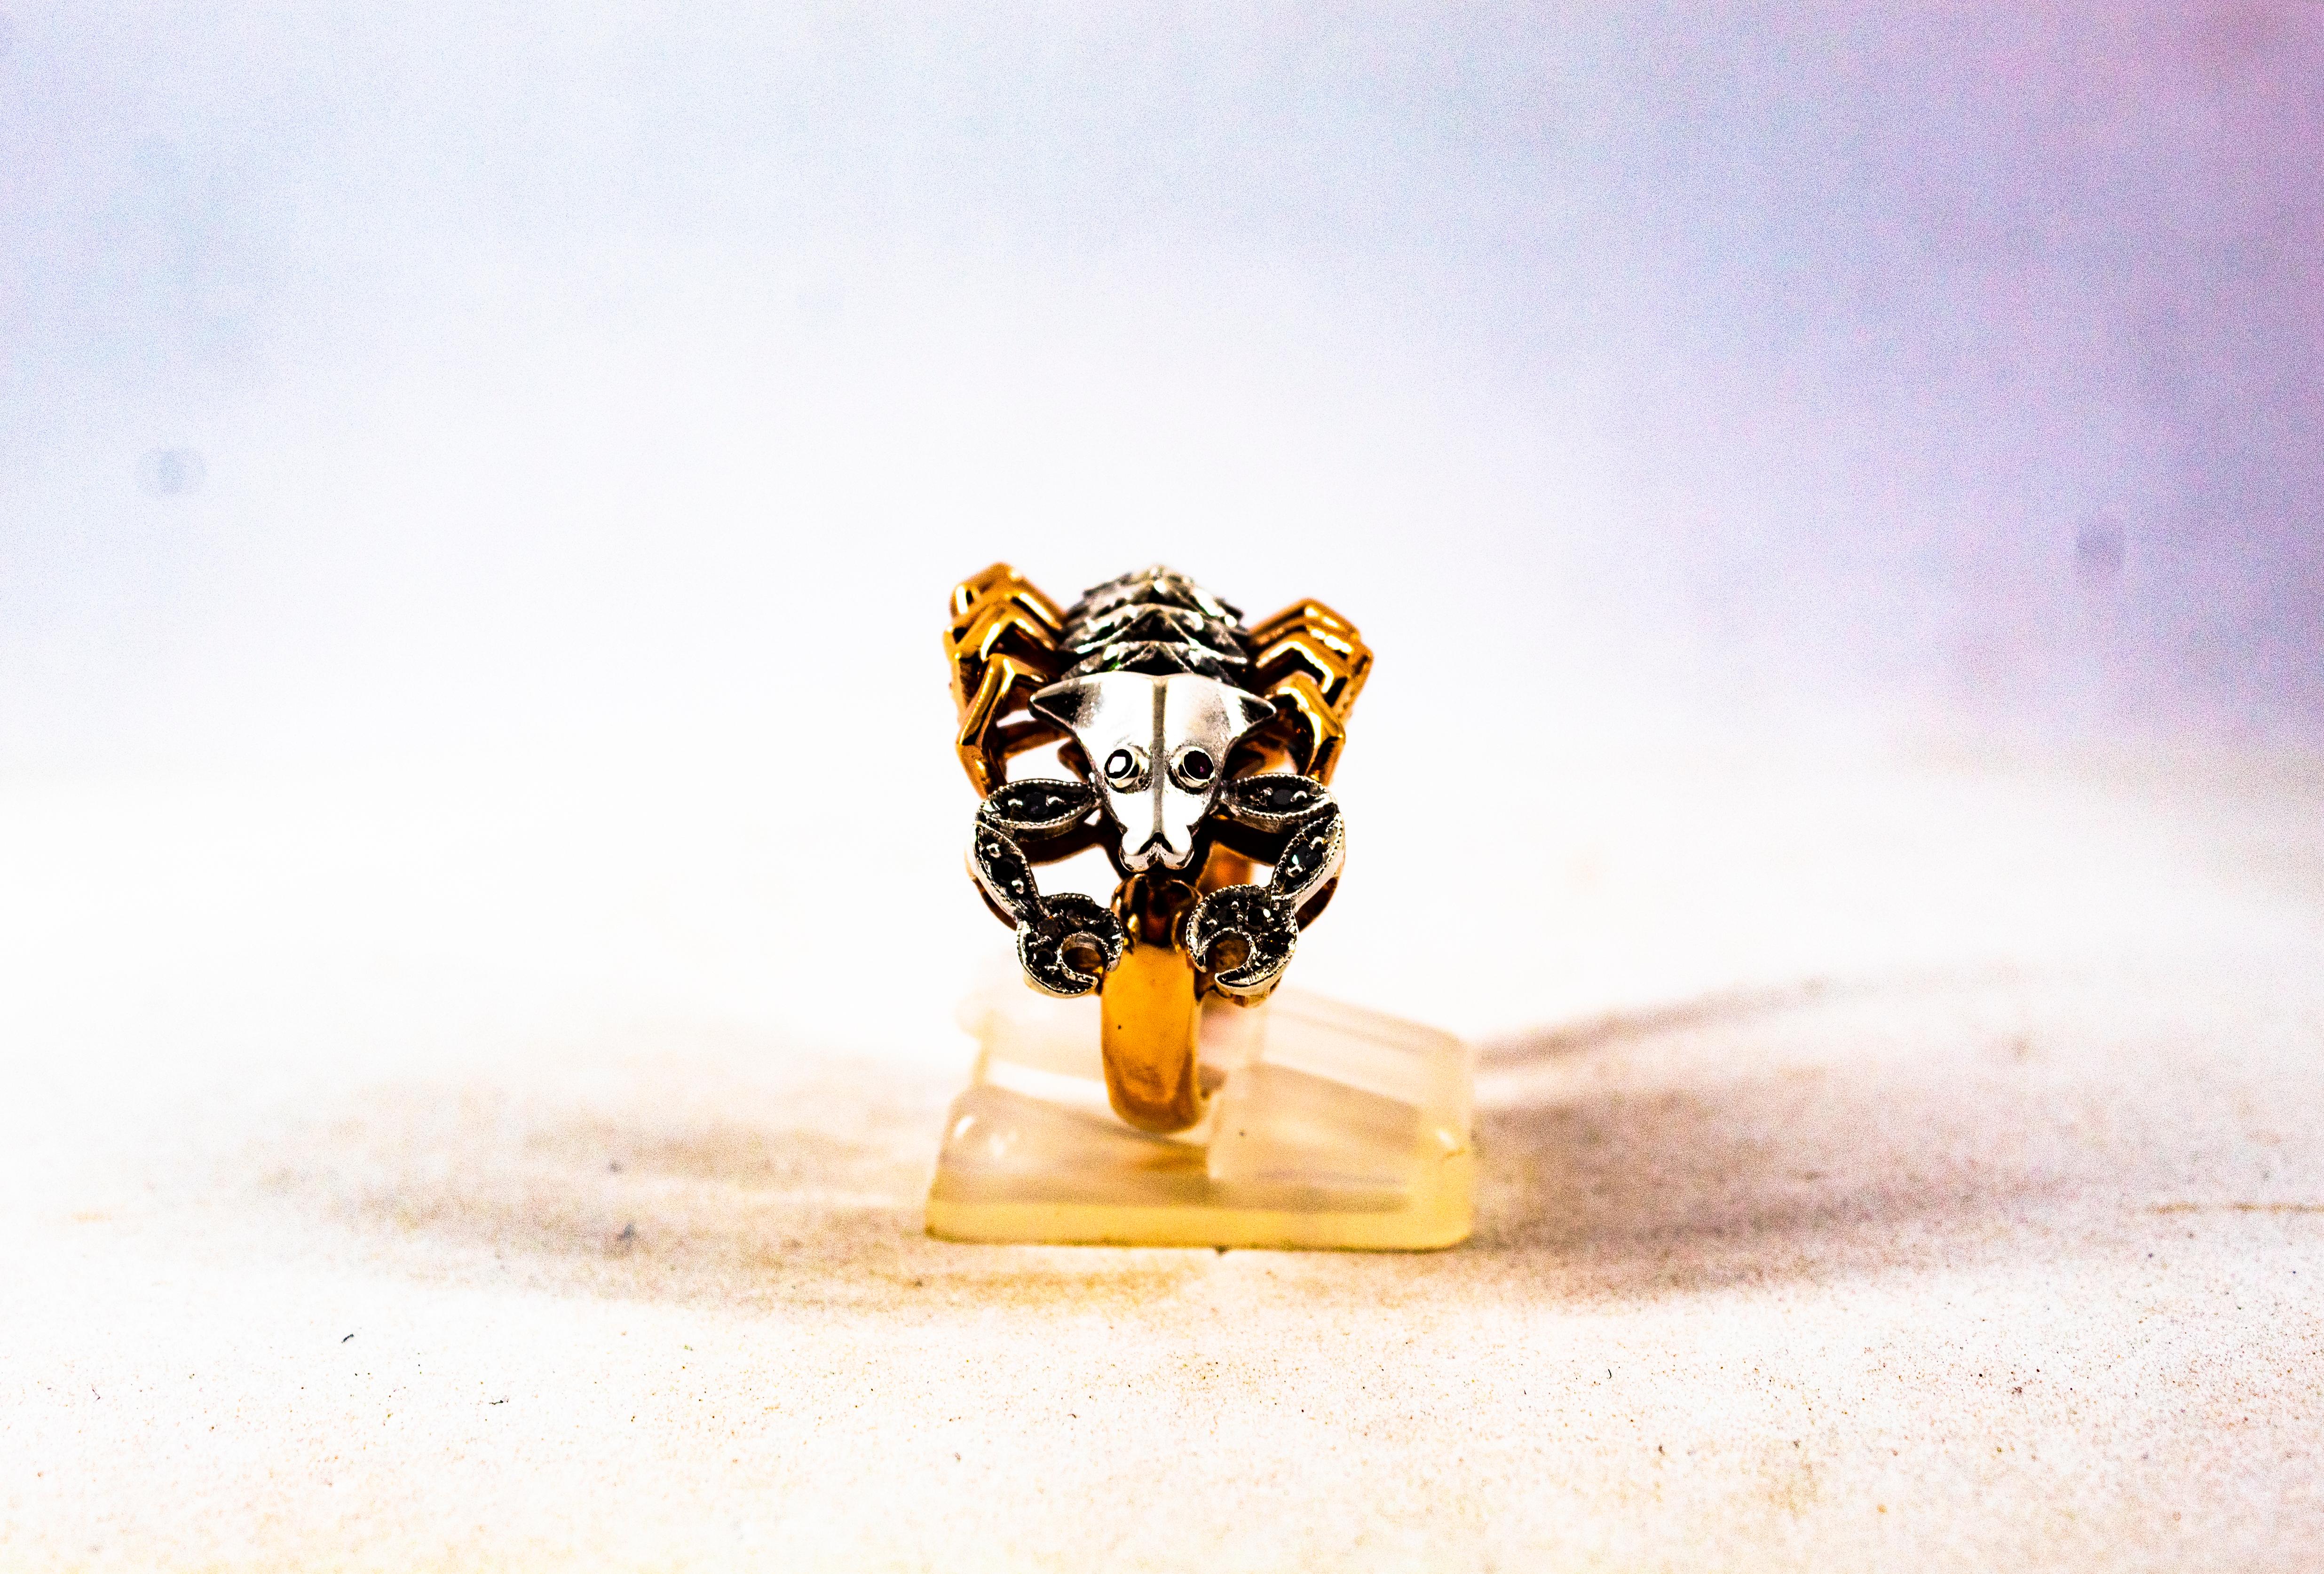 This Ring is made of 9K Yellow Gold and Sterling Silver.
This Ring has 0.20 Carats of White Diamonds.
This Ring has 0.11 Carats of Black Diamonds.
This Ring has 0.10 Carats of Tsavorite.
This Ring has 0.05 Carats of Rubies.
This Ring is inspired by